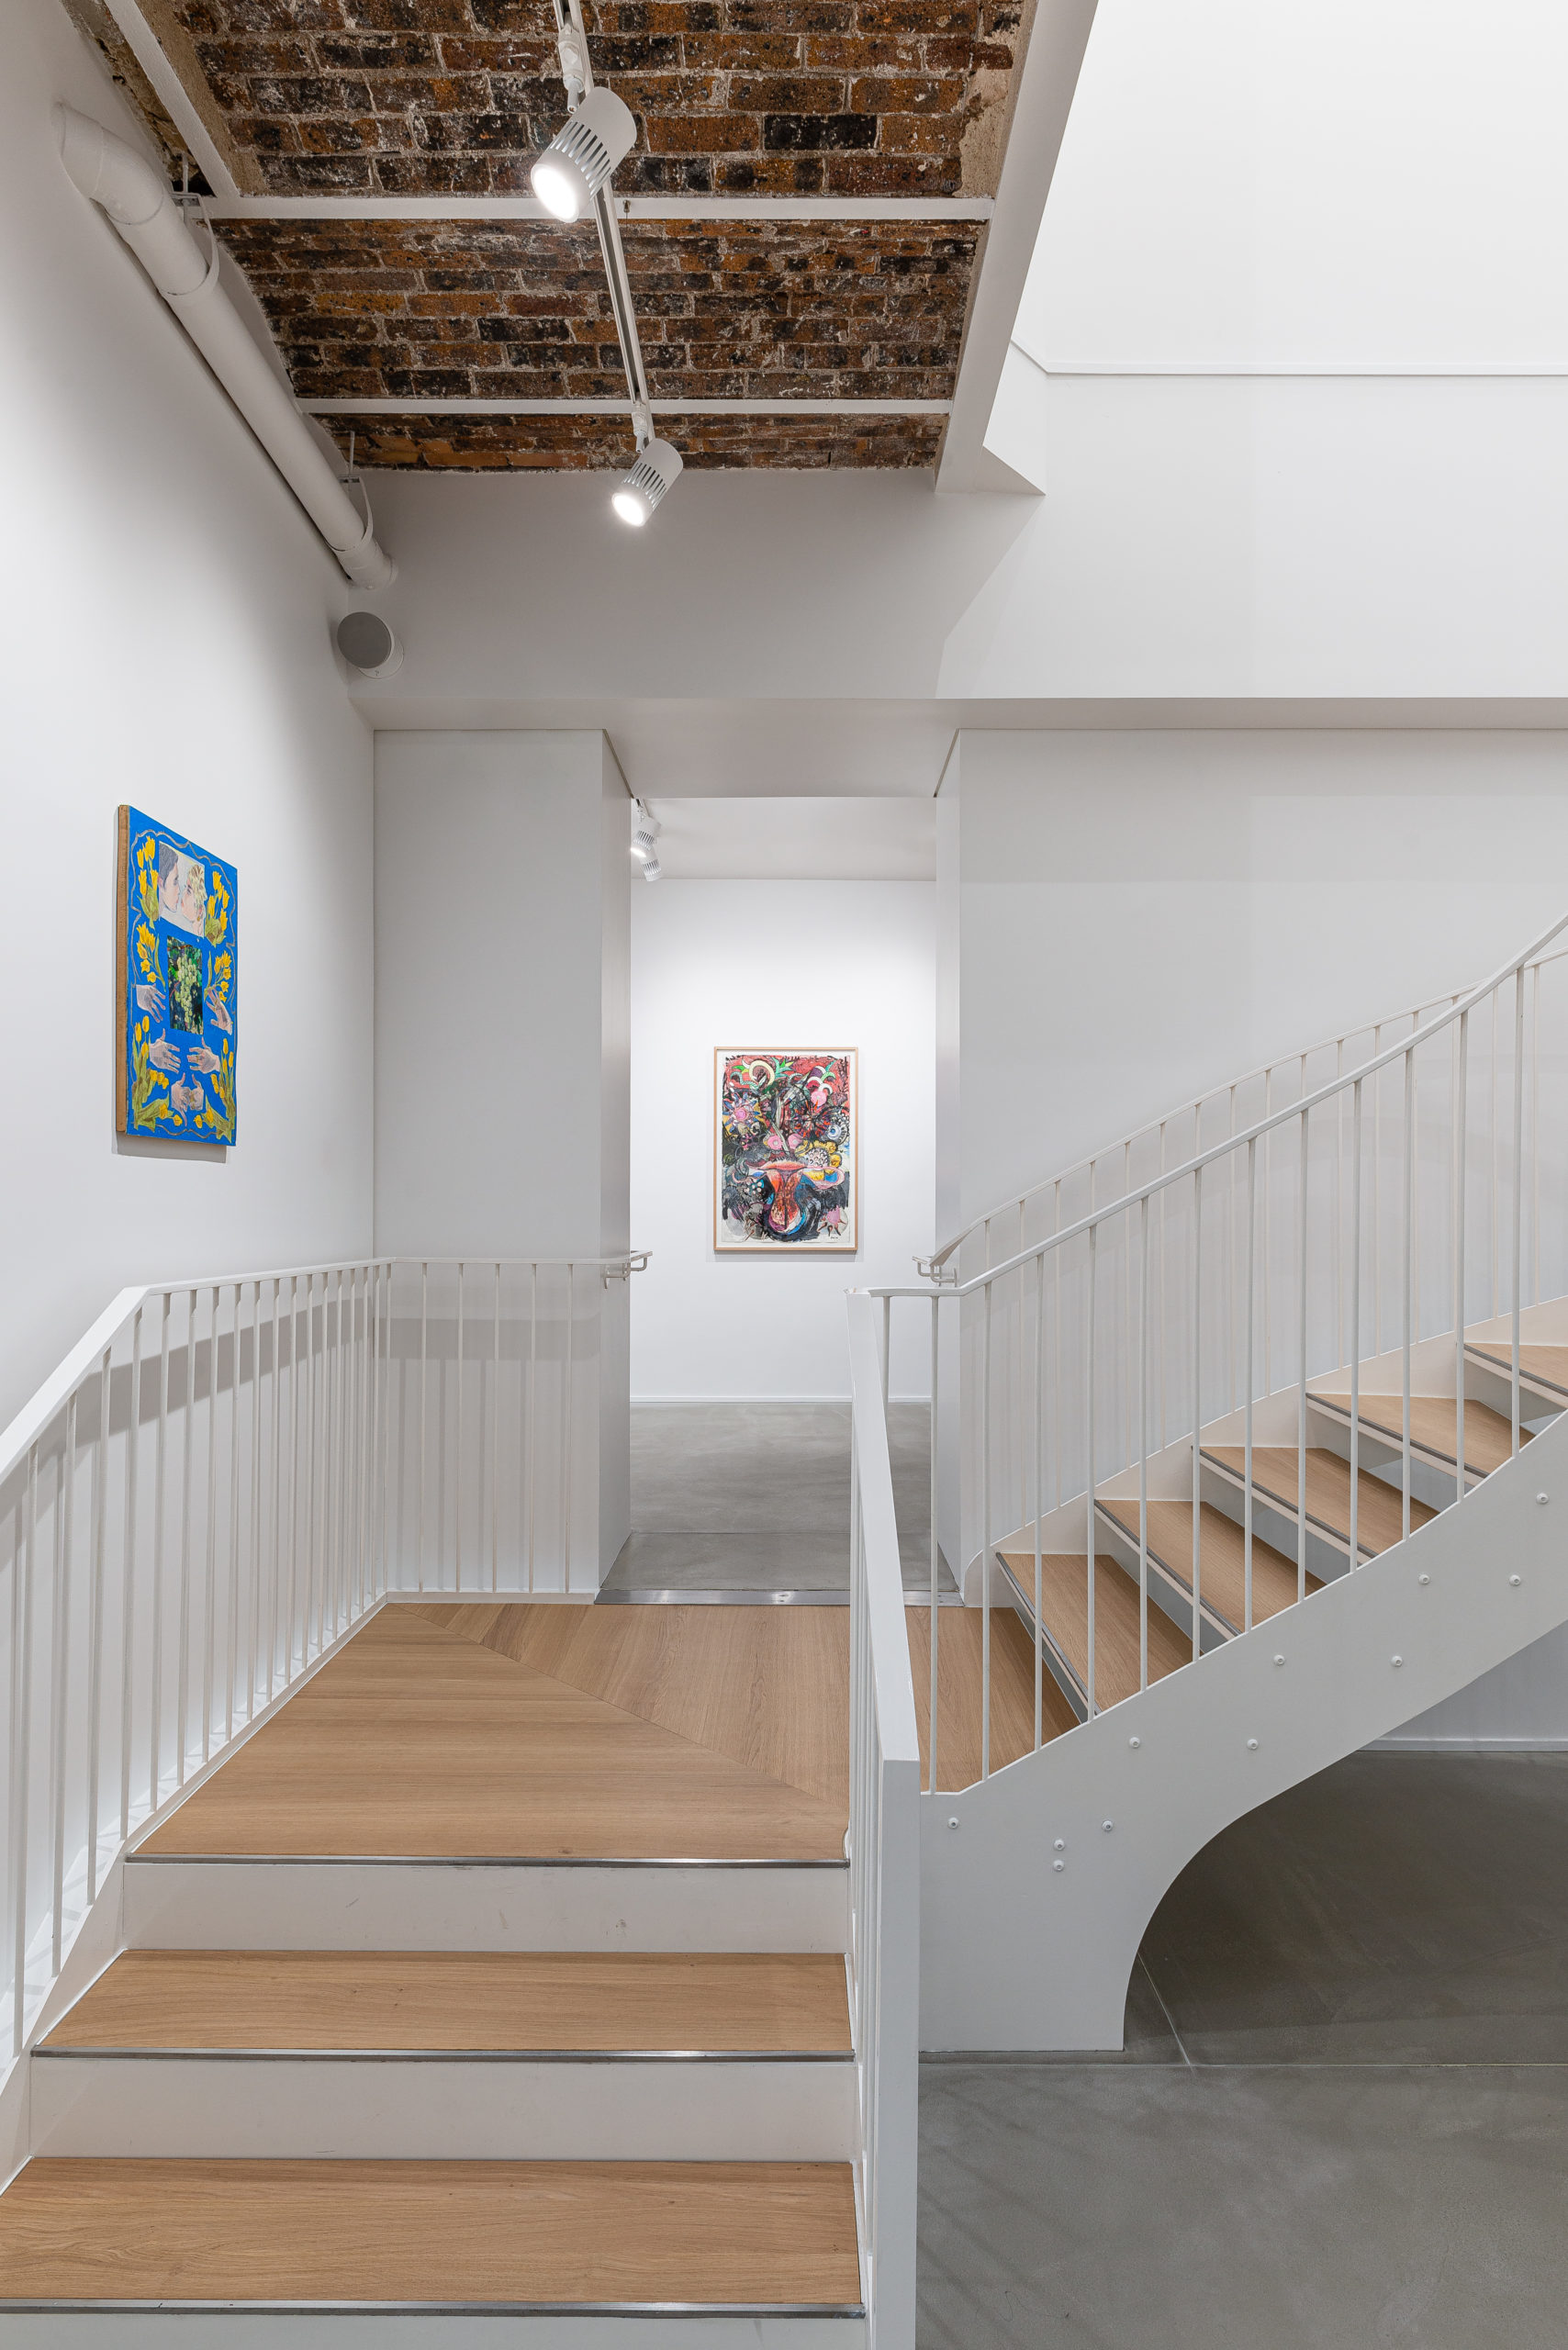 Installation view of 2011-2021 galerie l'inlassable exhibition, for the tenth anniversary of the Galerie L’inlassable. Works entitled "Oda a la primavera" by Francisco Pinzón Samper and "sans title" by Frédérique Loutz